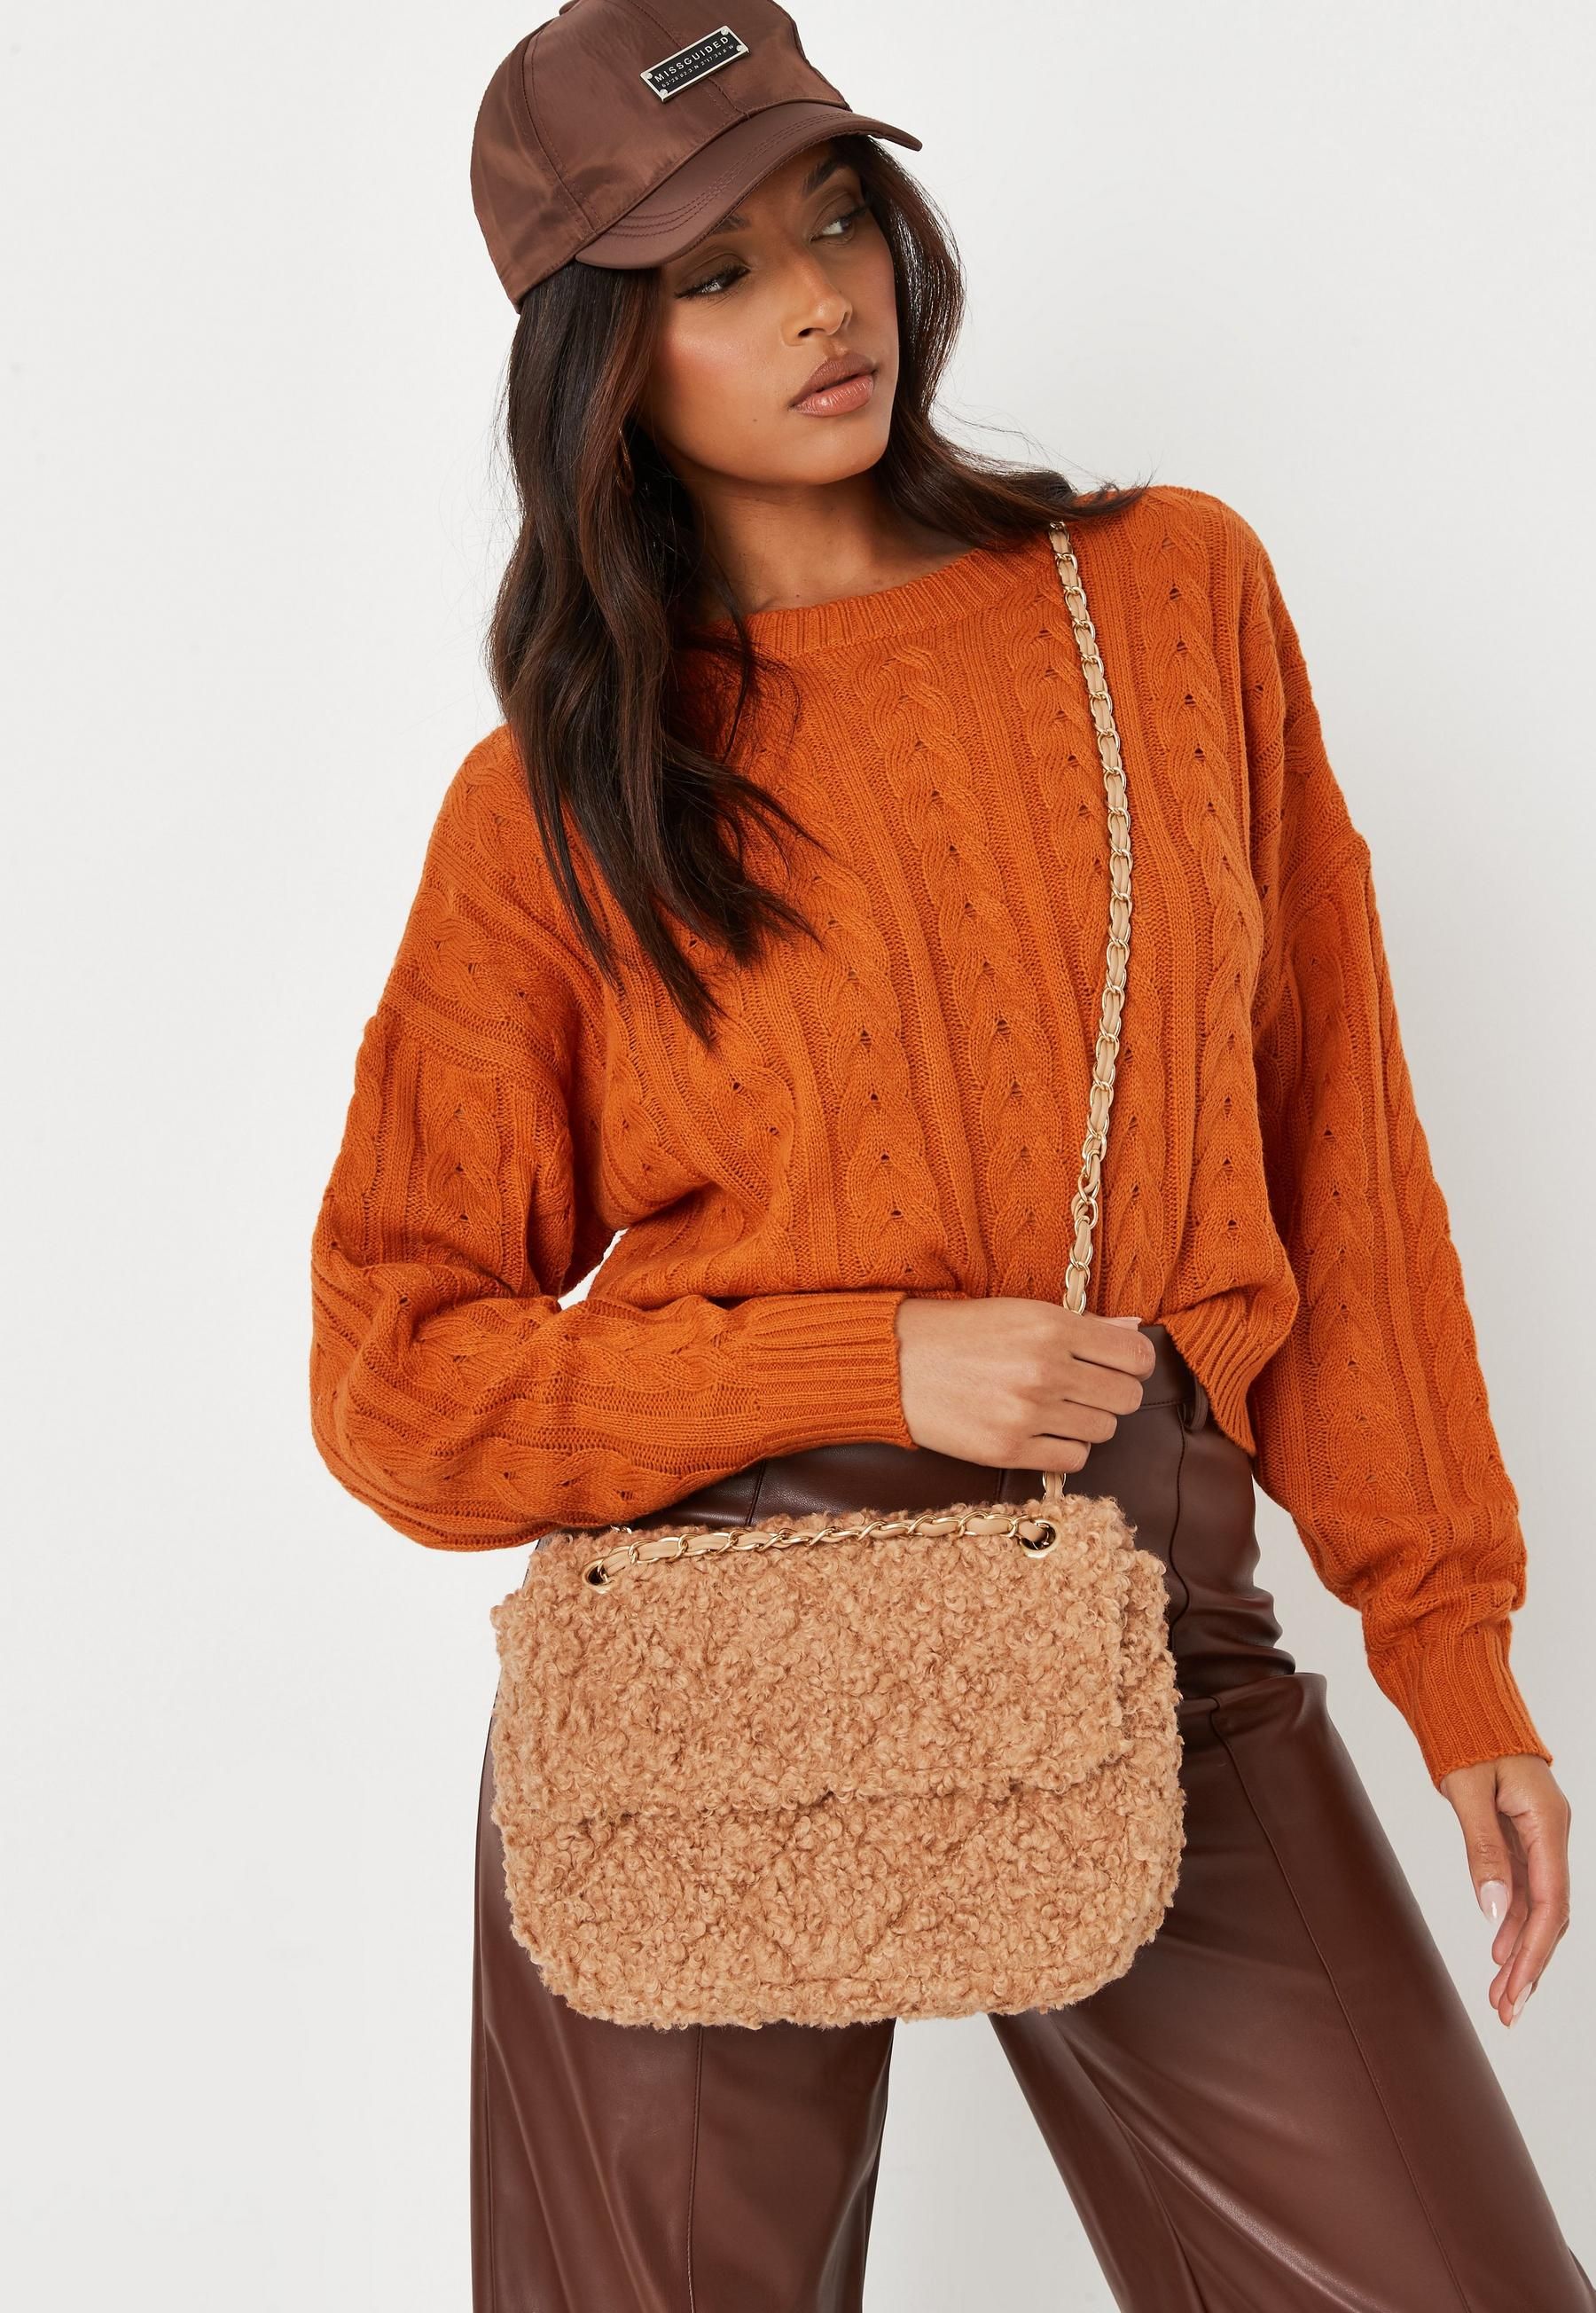 Missguided - Tan Shearling Quilted Chain Strap Bag | Missguided (US & CA)